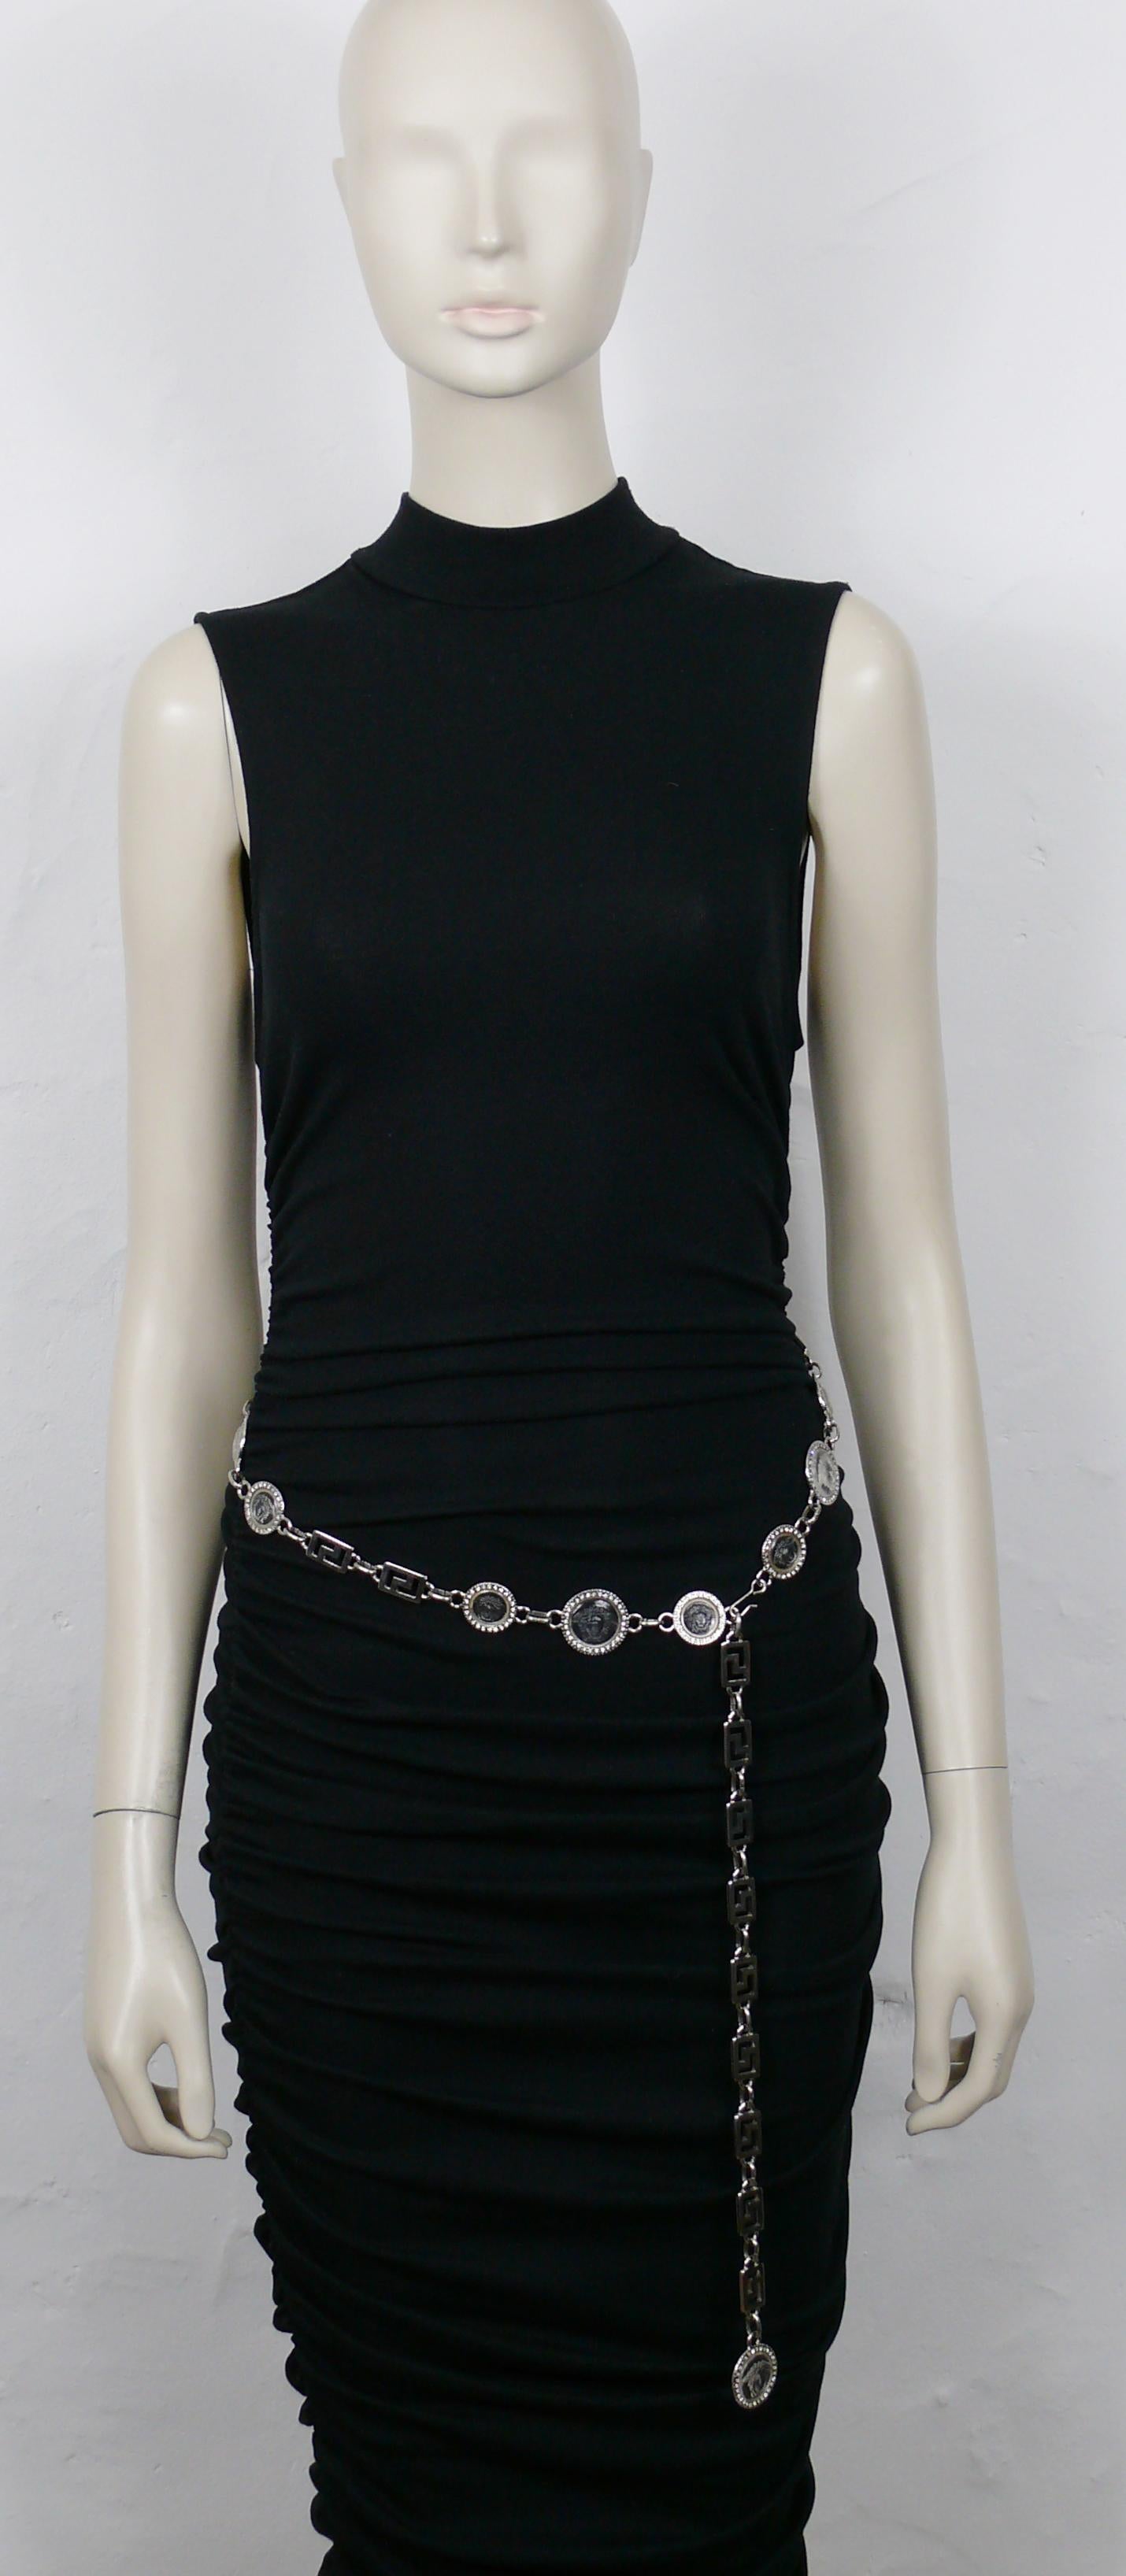 VERSATILE by GIANNI VERSACE vintage iconic silver tone belt featuring greek key links and clear resin Medusa coins embellished with clear crystals.

Hook clasp closure
Adjustable length.

Embossed GV VERSATILE.

Indicative measurements : wearable